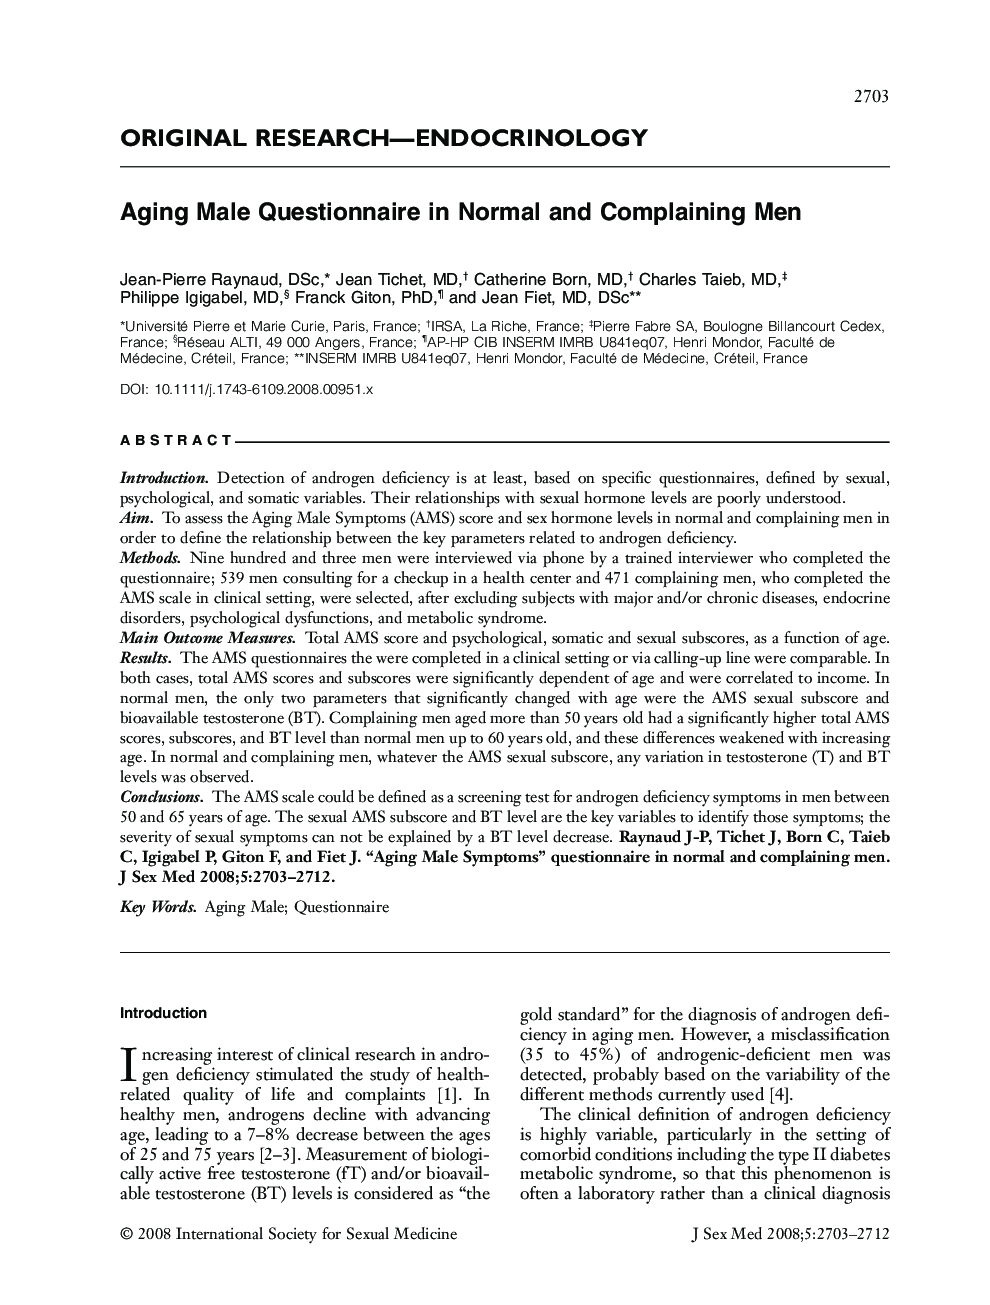 ORIGINAL RESEARCH-ENDOCRINOLOGY: Aging Male Questionnaire in Normal and Complaining Men